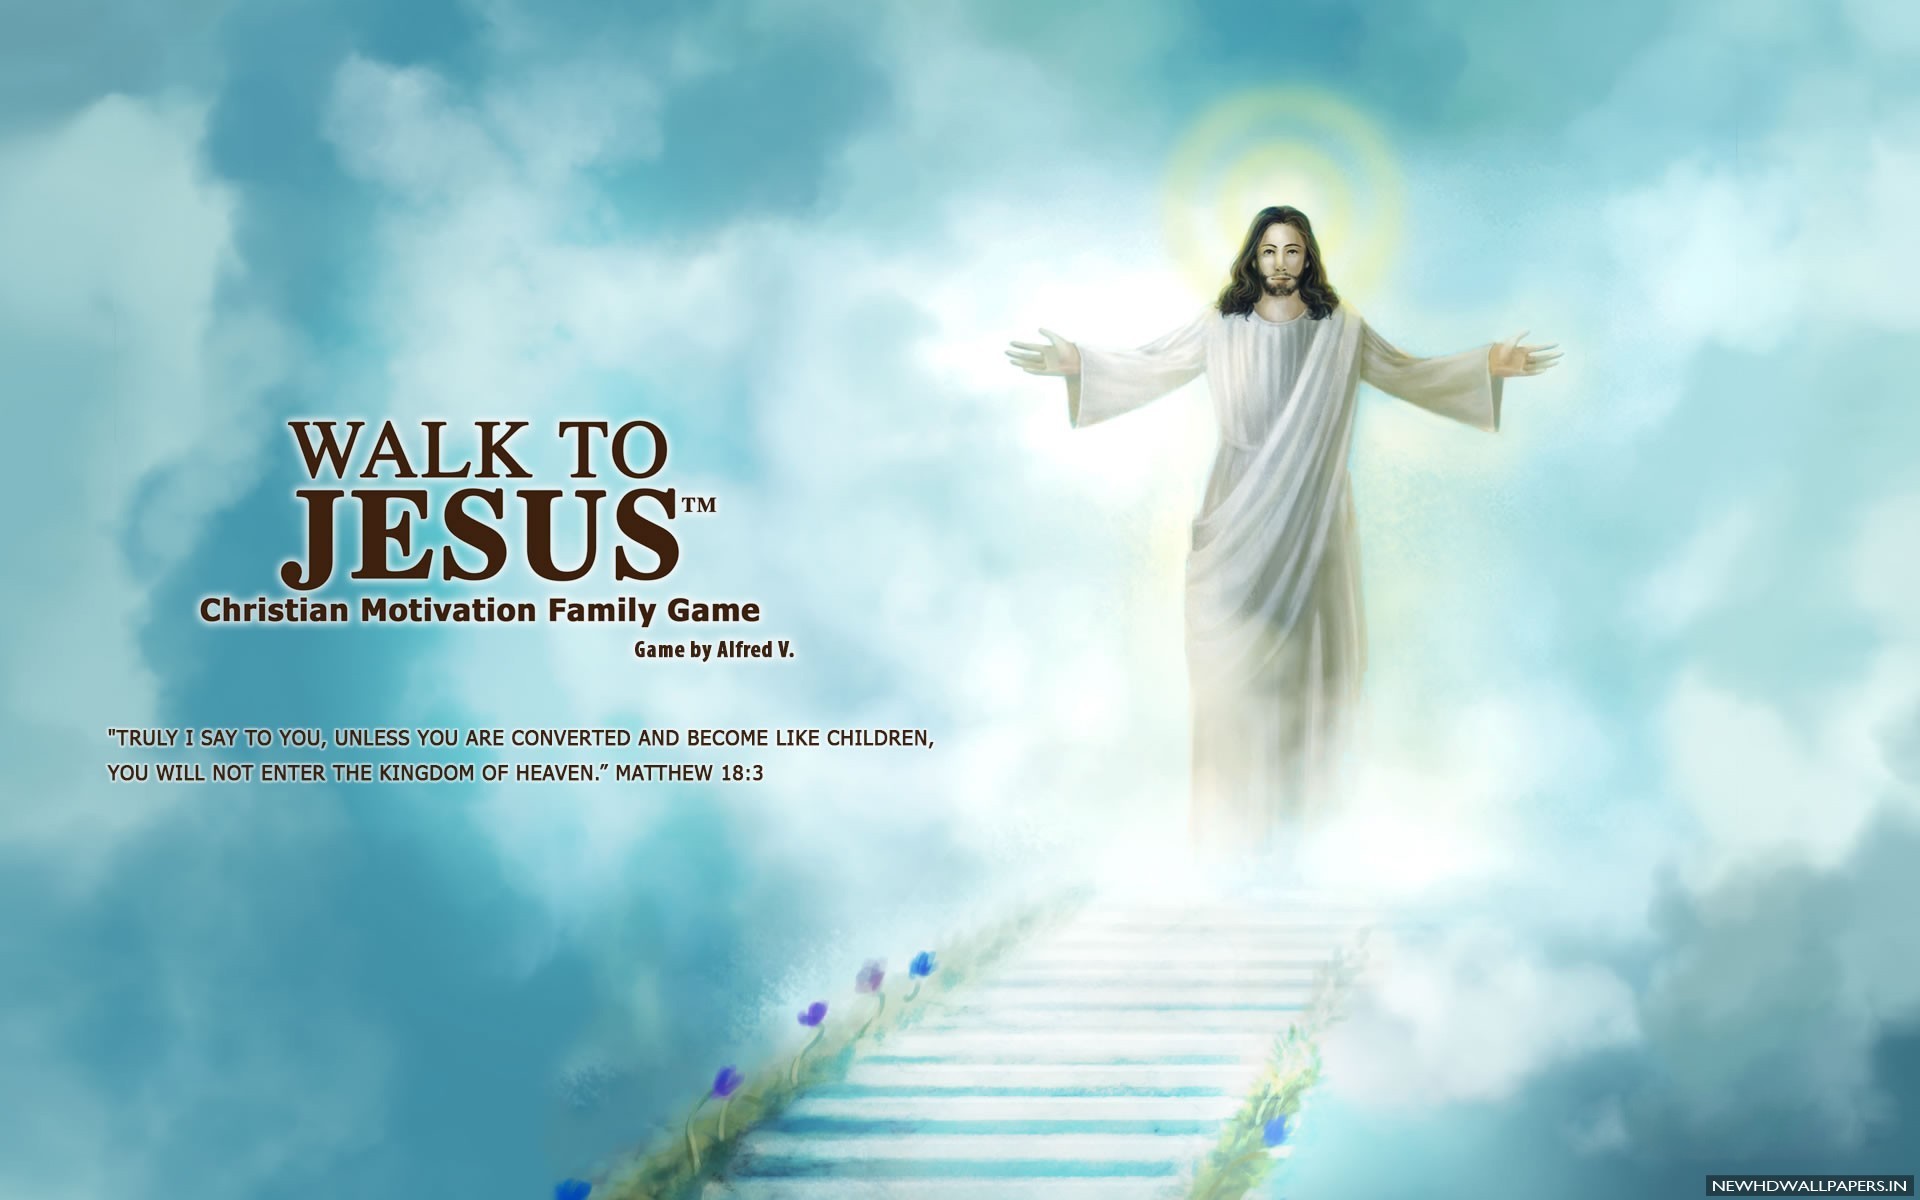 Jesus With Flowery Background Wallpaper, Pictures Of Jesus Wallpaper  Background Image And Wallpaper for Free Download